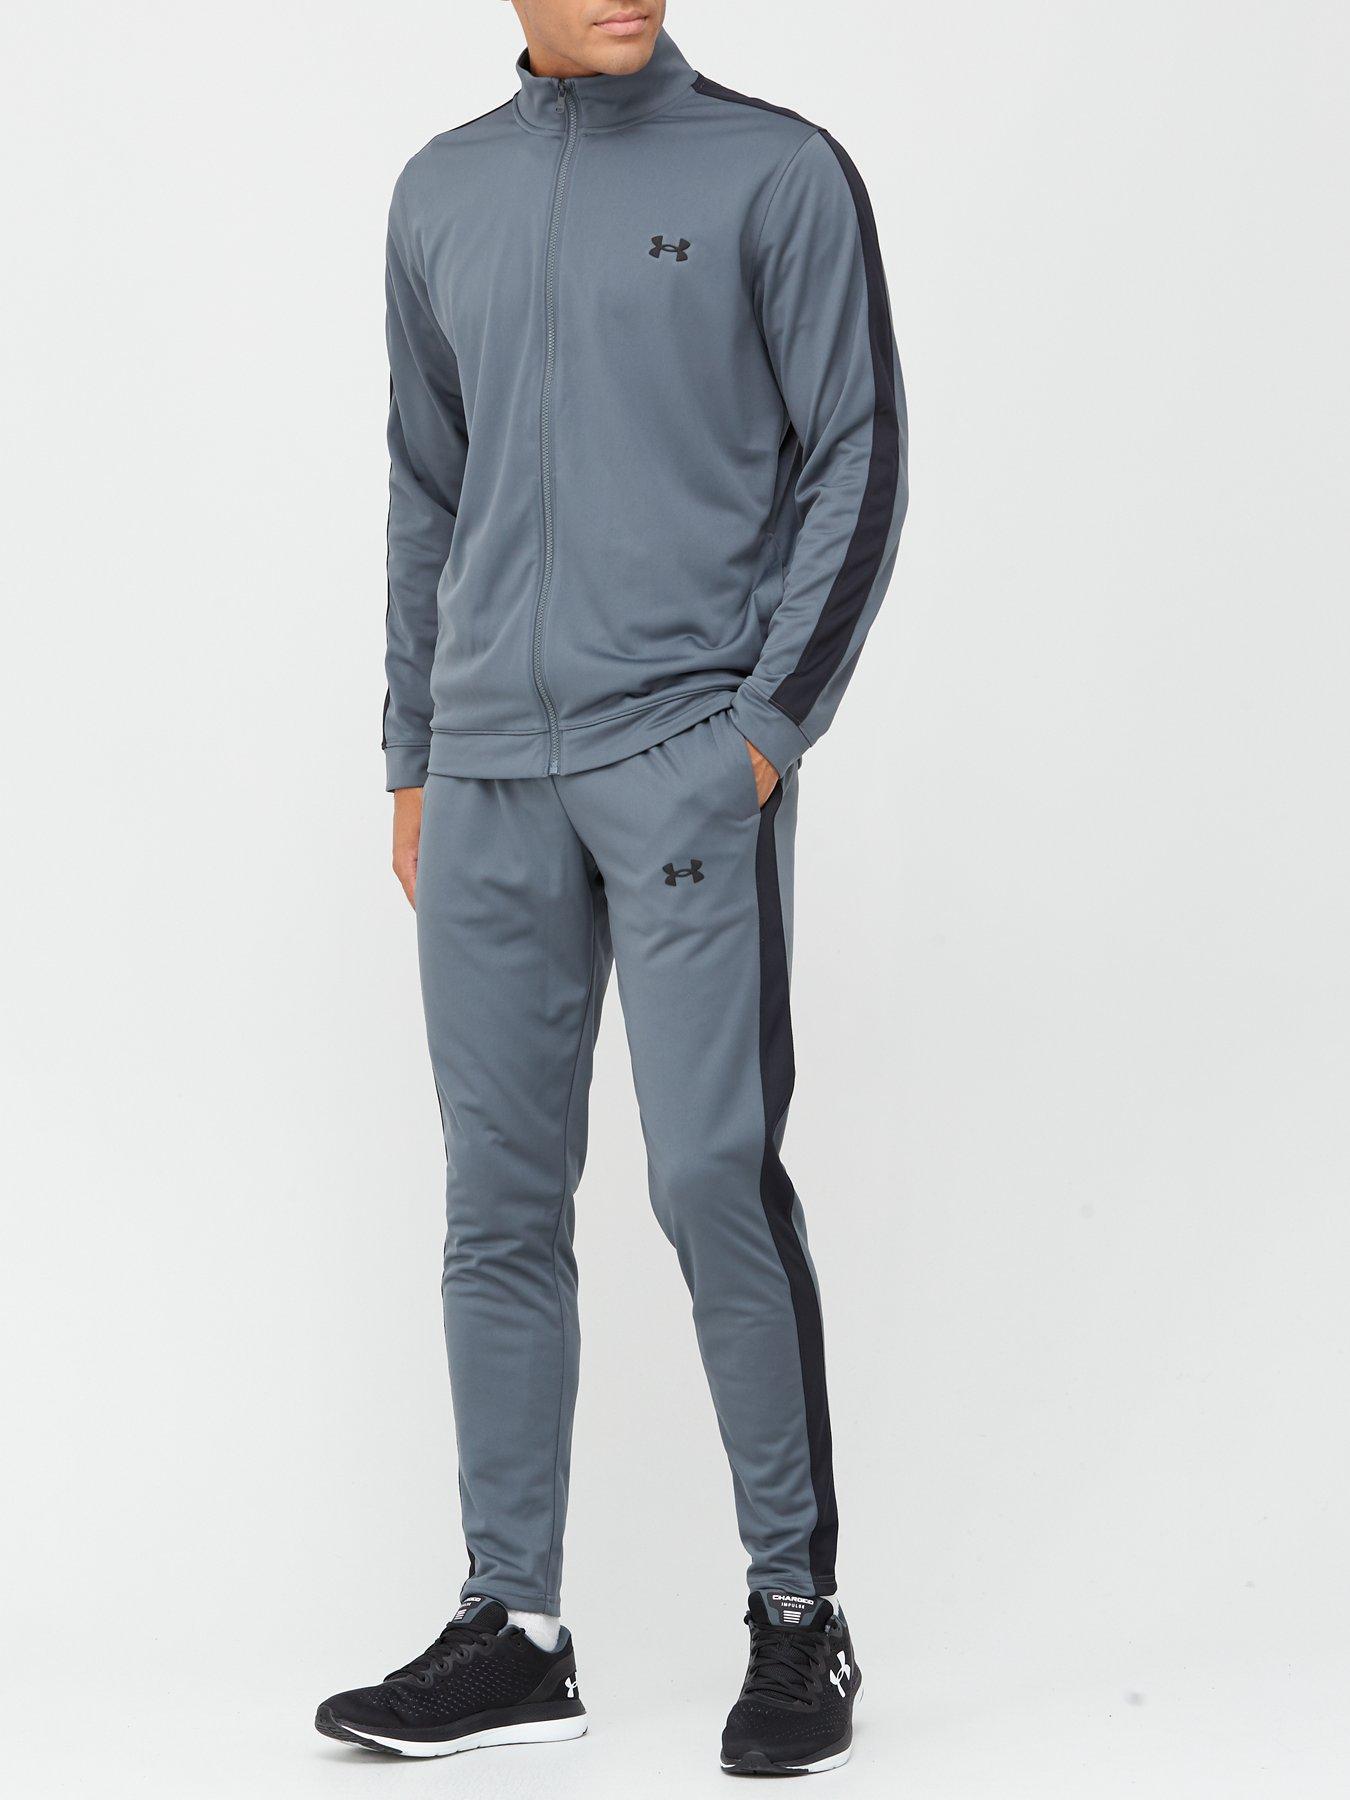 Under armour | Tracksuits | Sportswear 